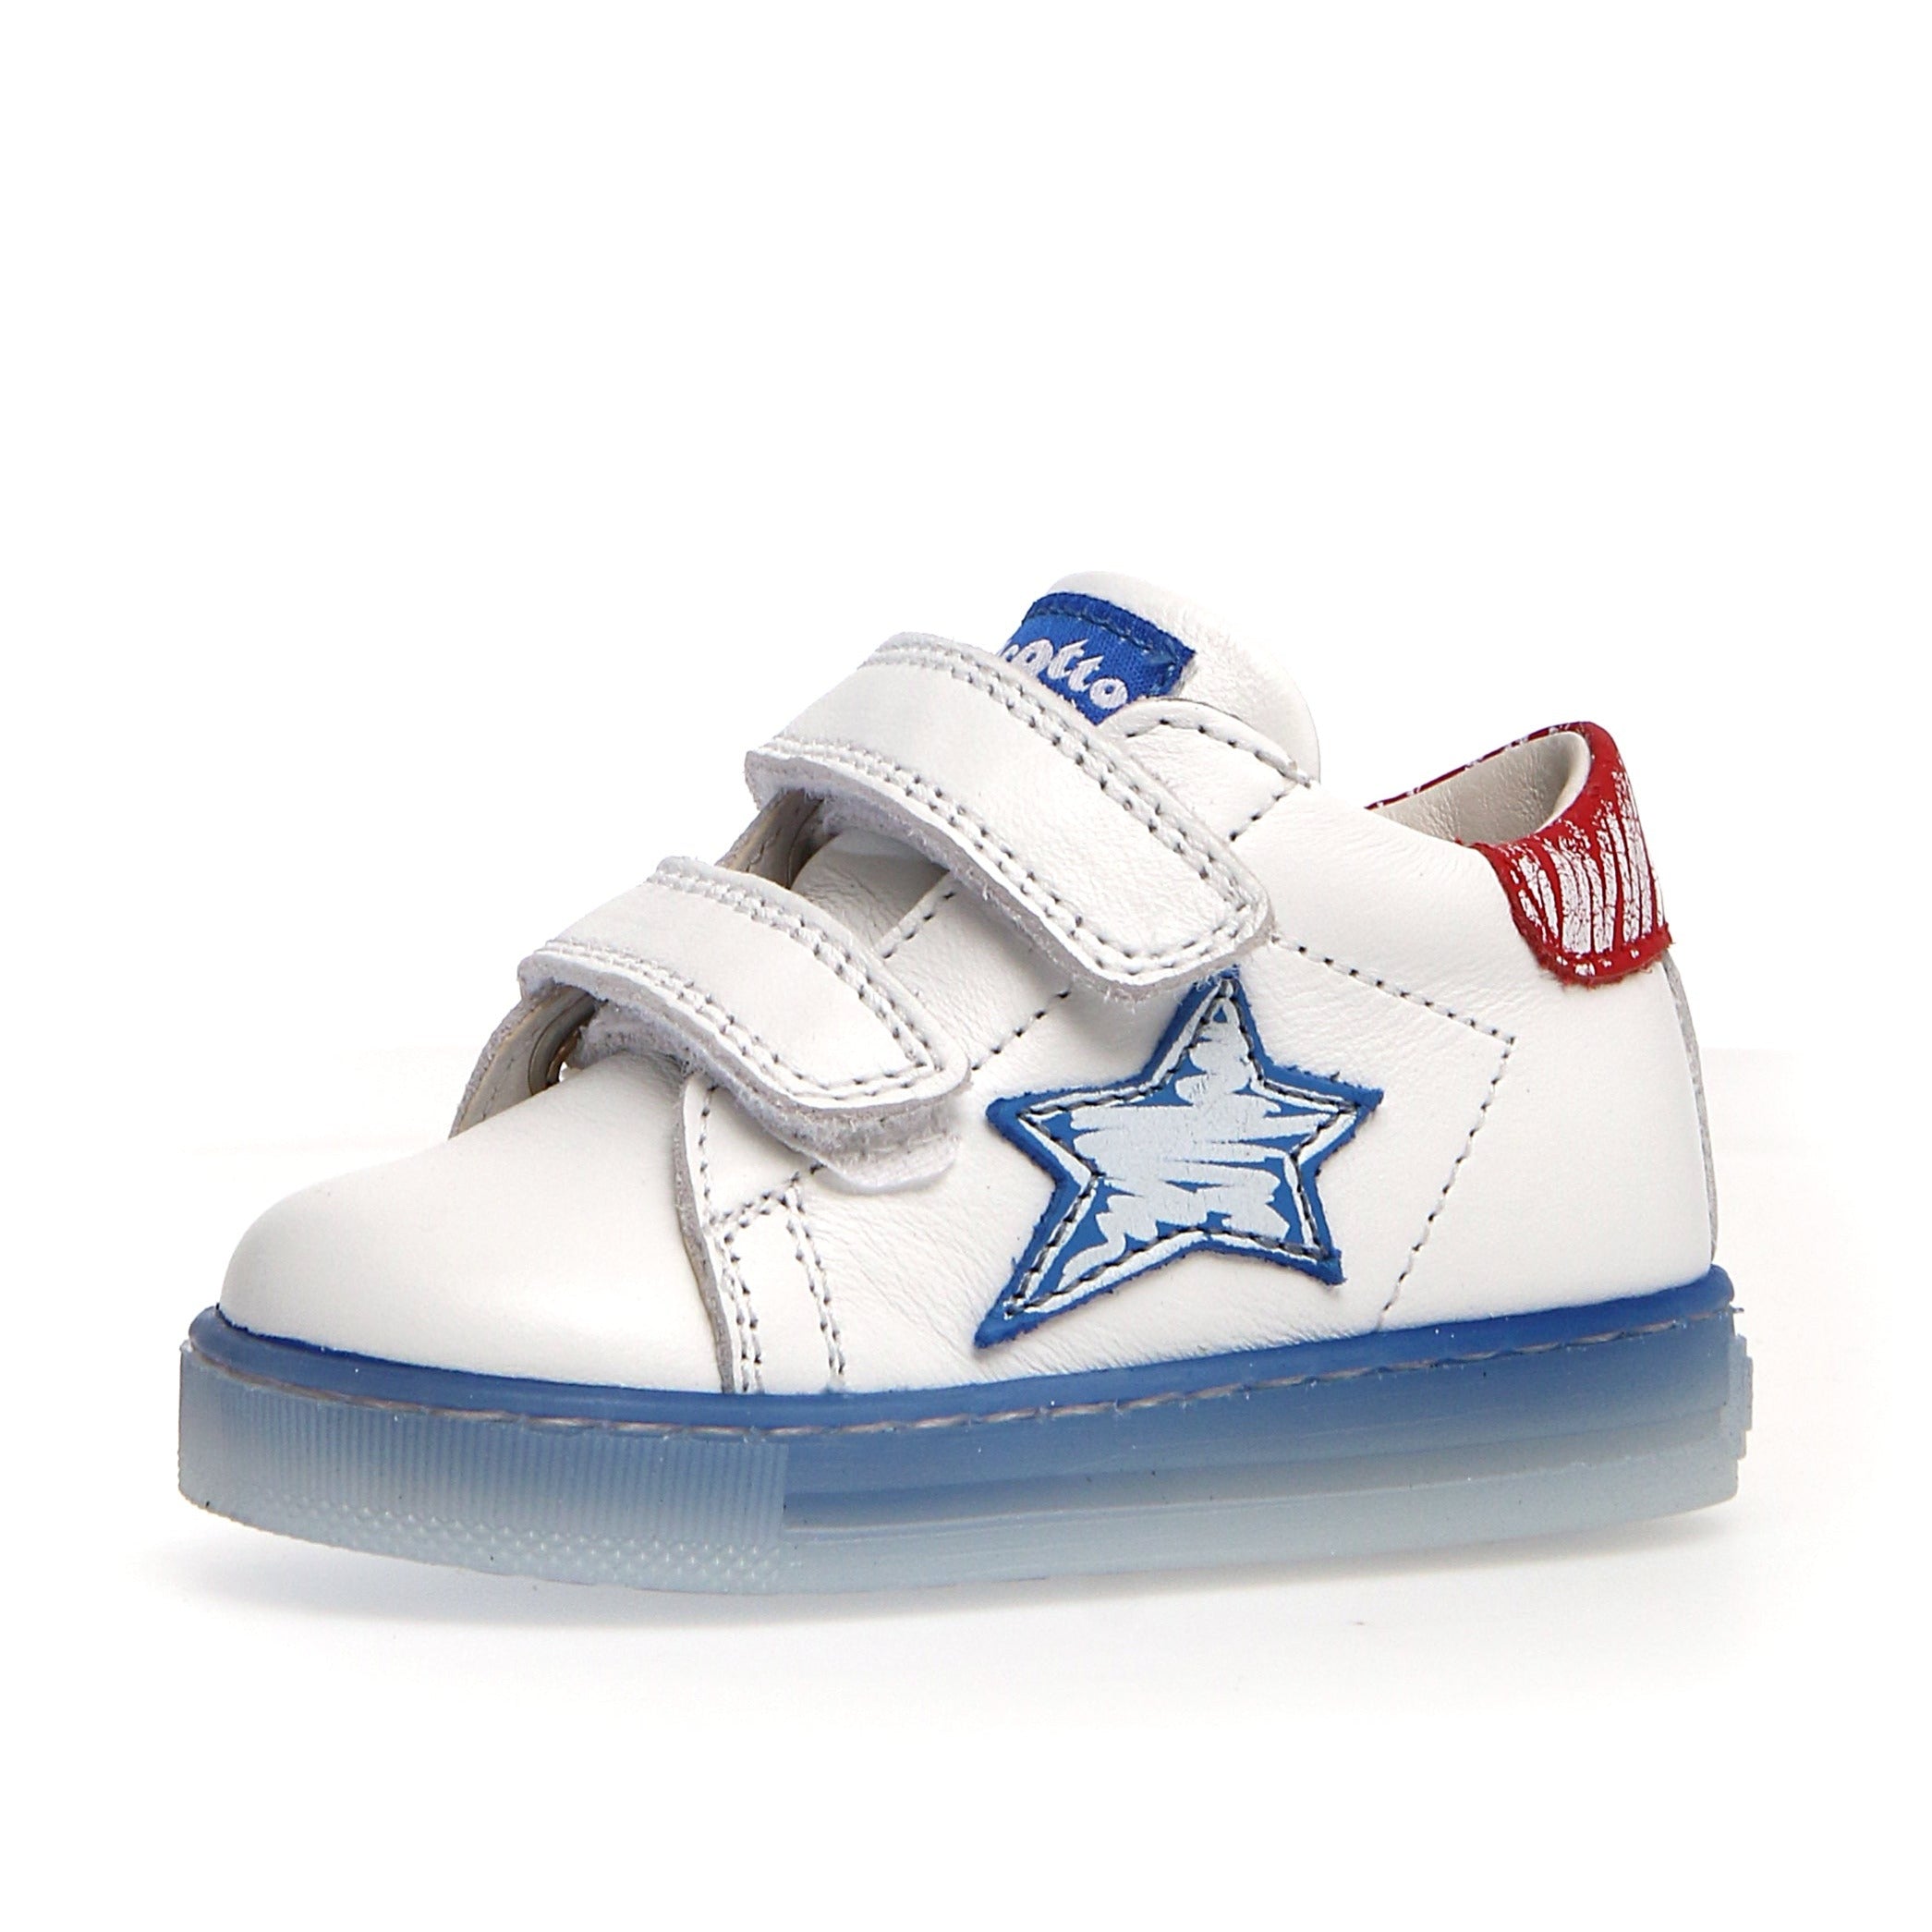 Consequent slaaf patrouille Naturino Falcotto Boy's and Girl's Sasha VL Brus Fashion Sneakers - Wh –  Just Shoes for Kids